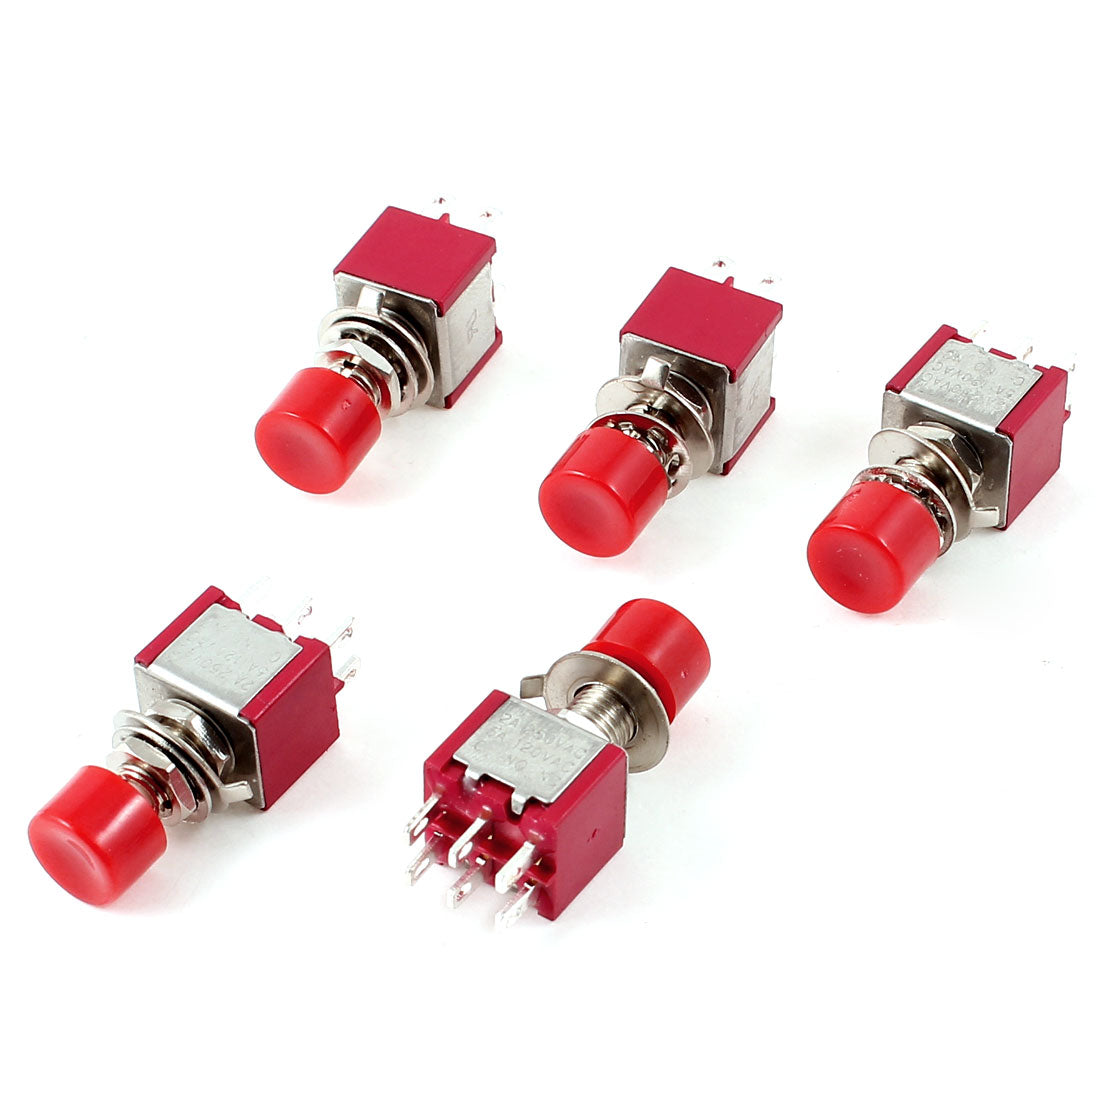 uxcell Uxcell 5pcs 6 Pin Momentary 1 NO 1 NC Off/On/Off DPDT Red Cap Push Button Switch AC 120V 5A 250V 2A